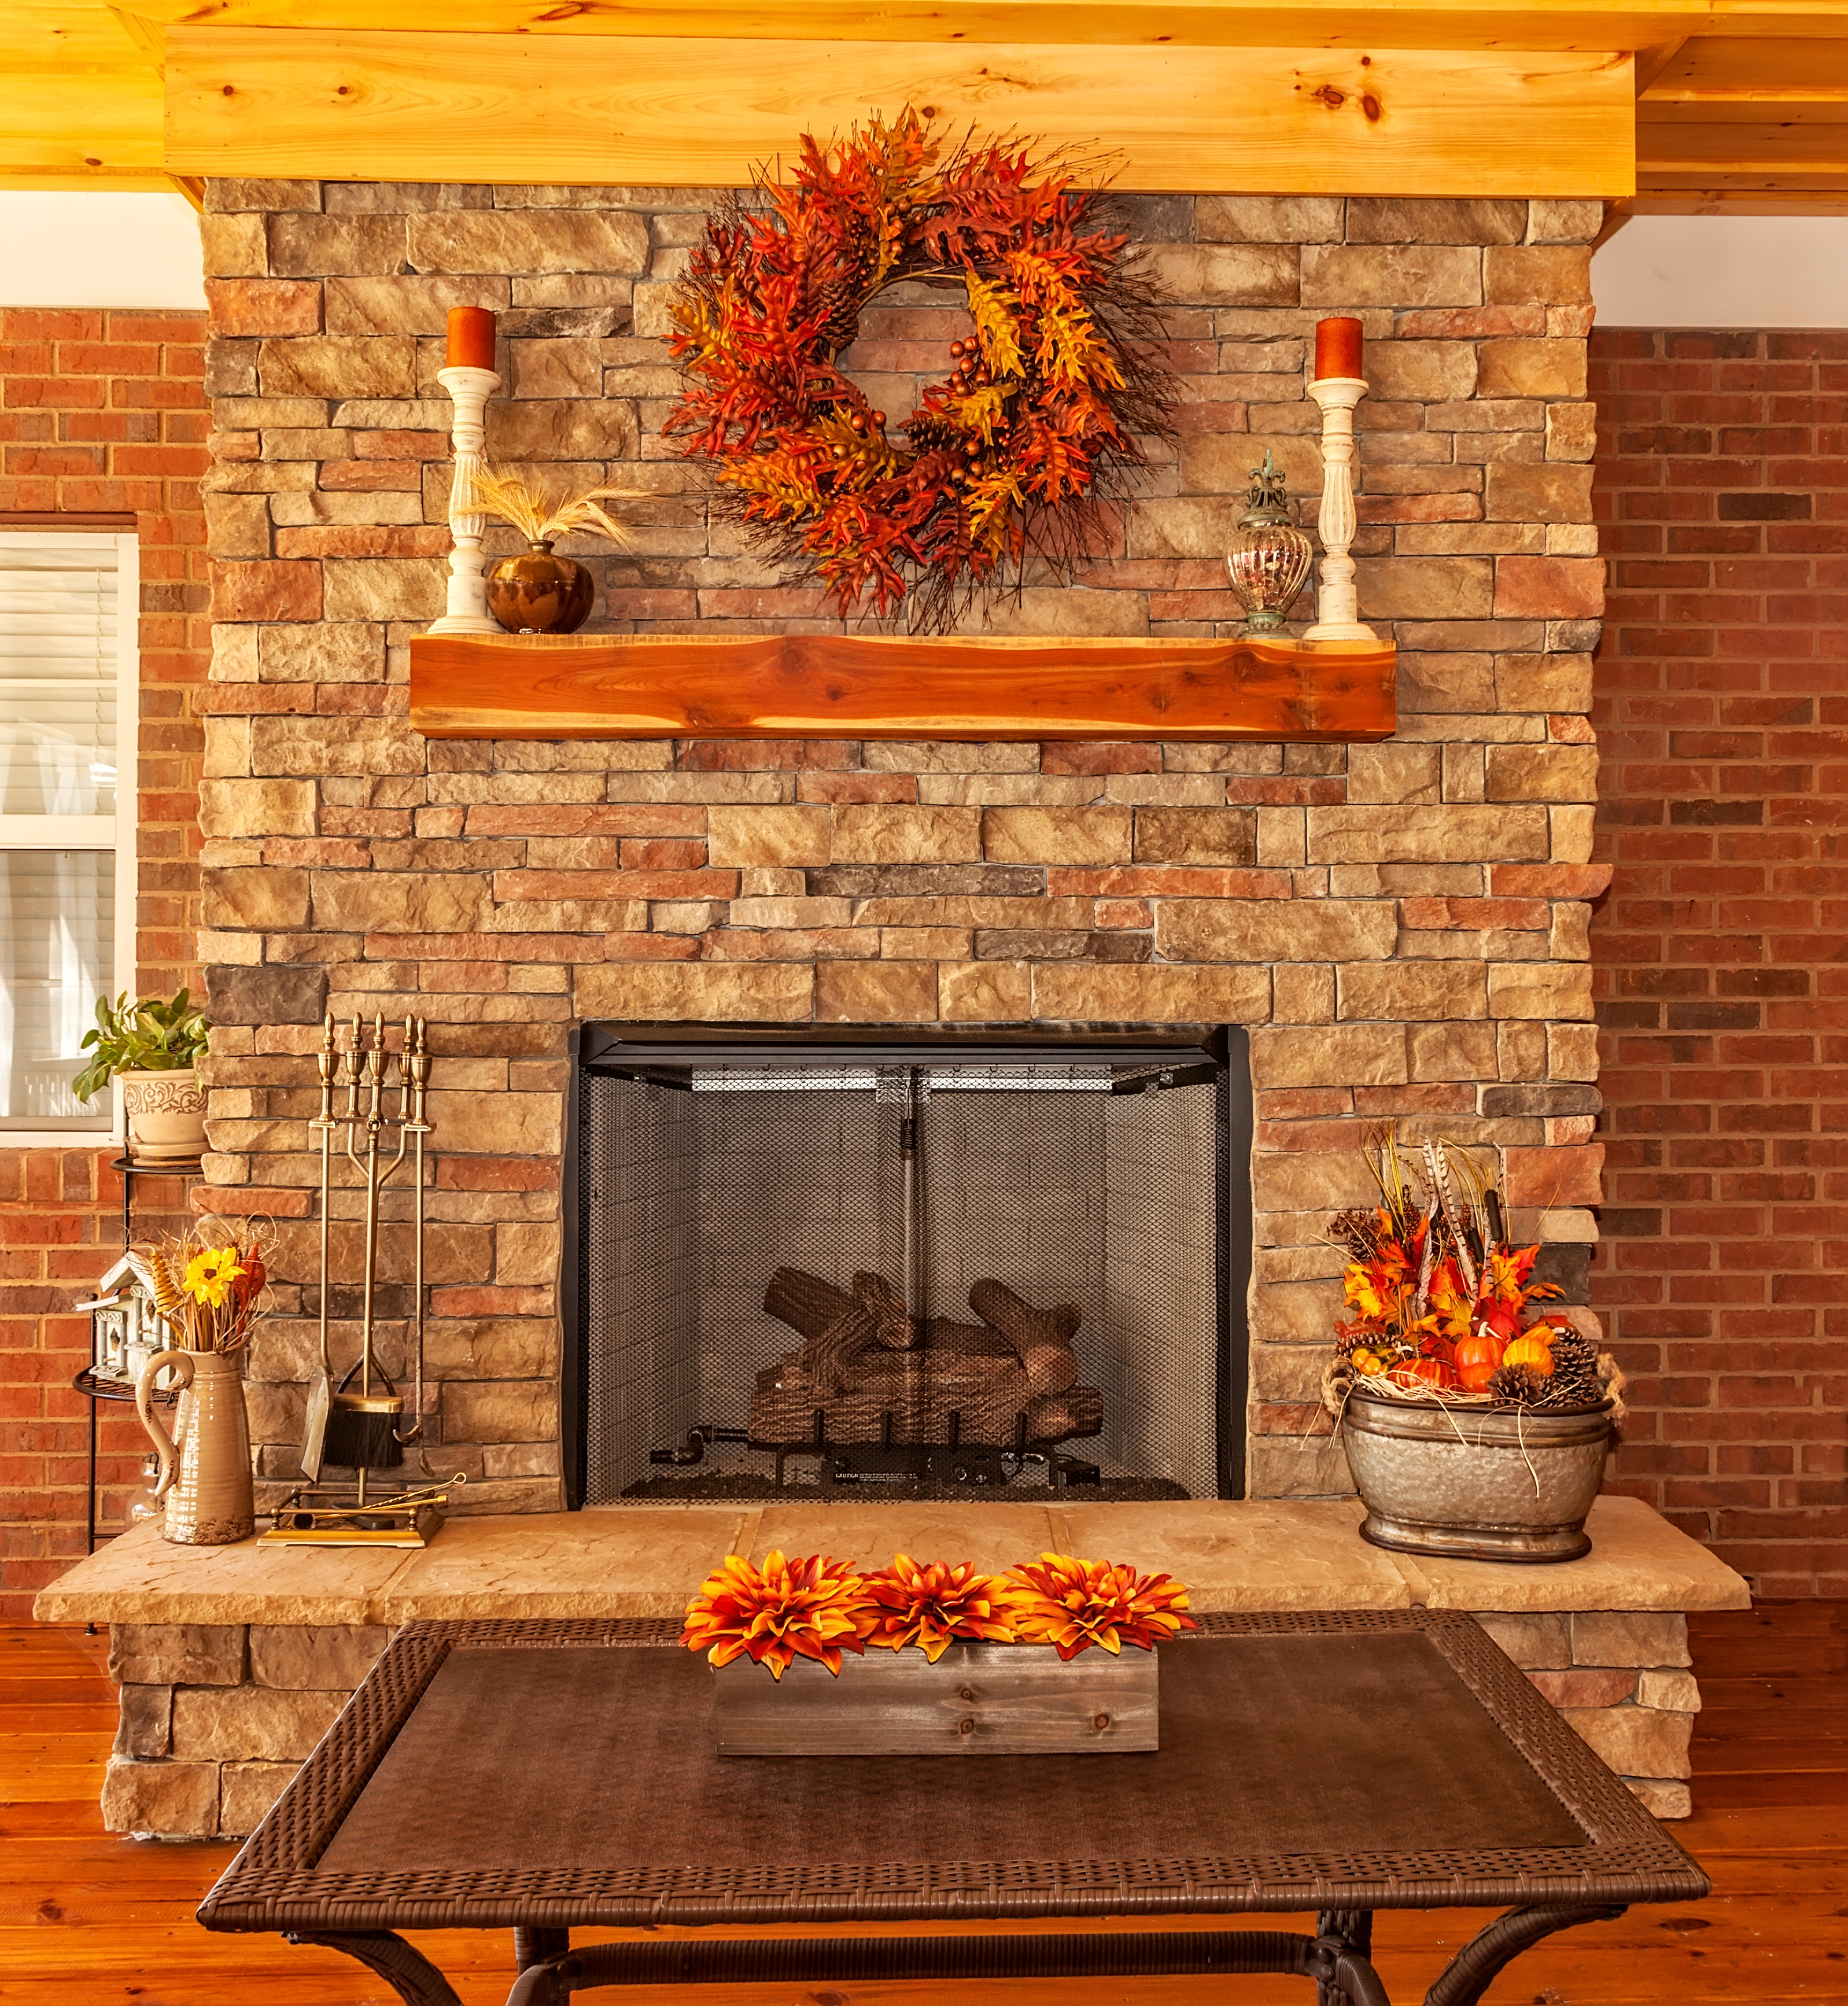 5 Fall Mantel Decorating Ideas That'll Make You Look Like a Pro 104